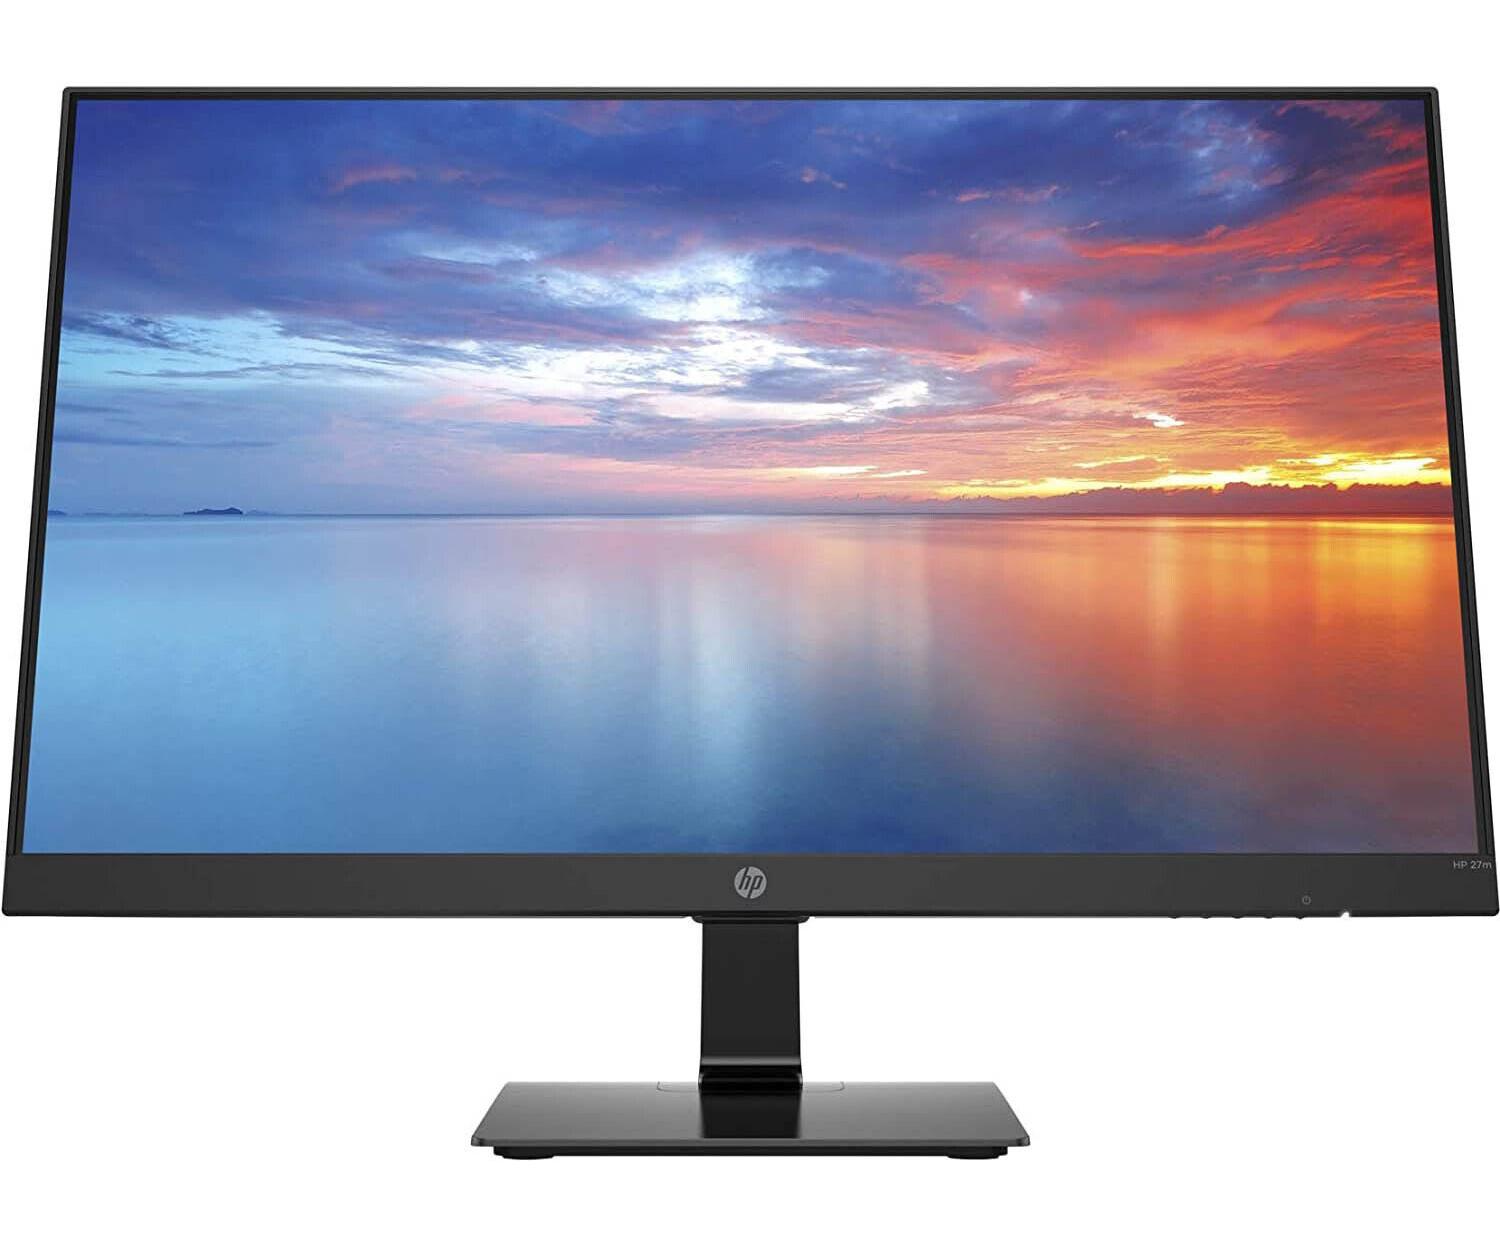 27in HP 27m 1920x1080 Ultraslim IPS Monitor for $102.39 Shipped